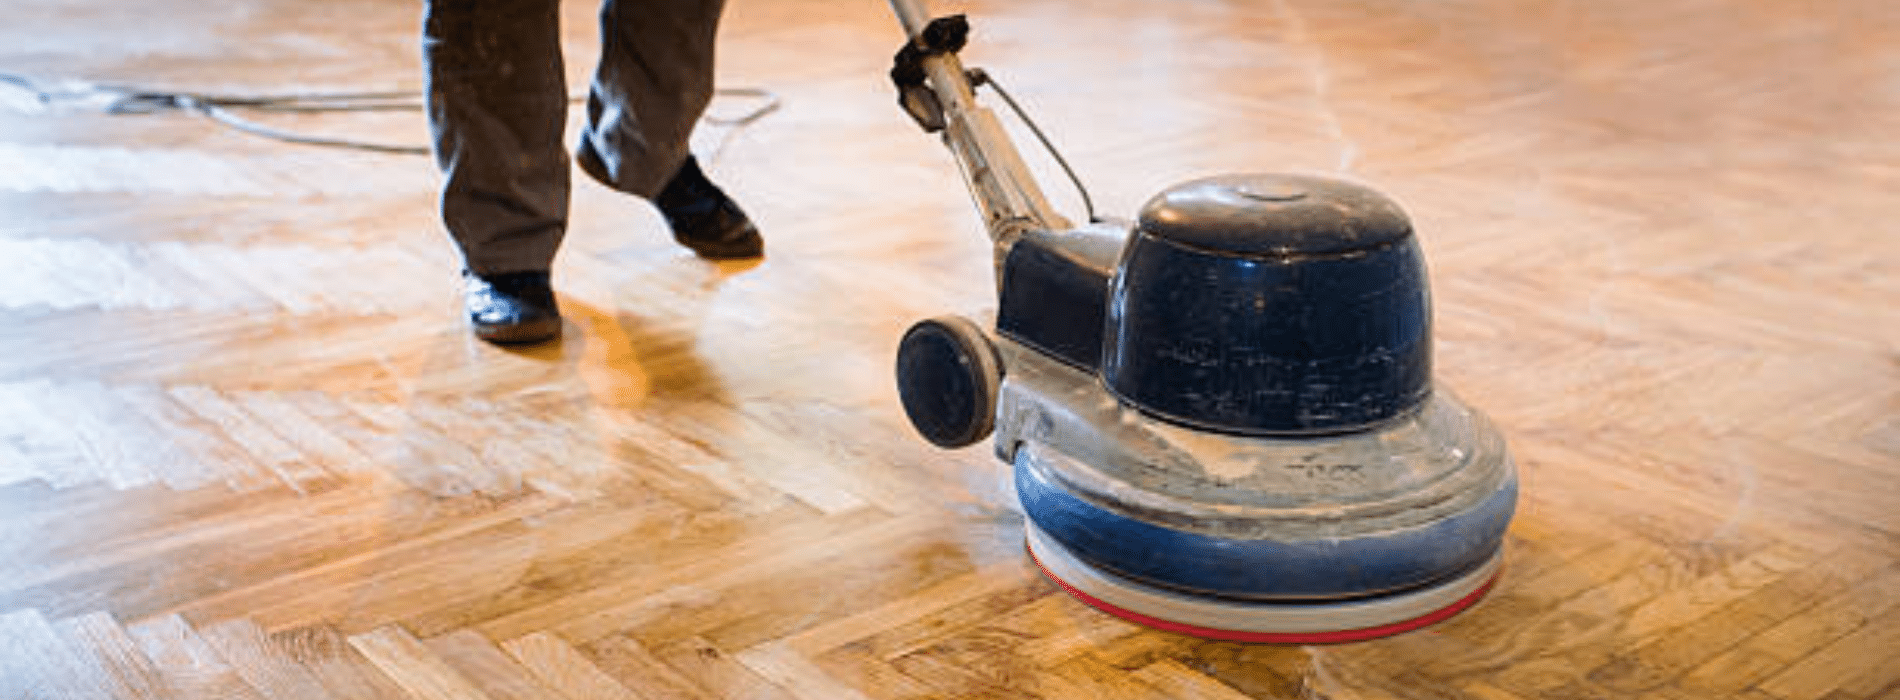 In Harold Wood, RM3 professional herringbone floor sanding with Bona Effect 2200 sander. Voltage: 230V. Frequency: 50-60Hz. Size: 250x750 mm. Experience clean and efficient results with our expert team using HEPA-filtered dust extraction system.